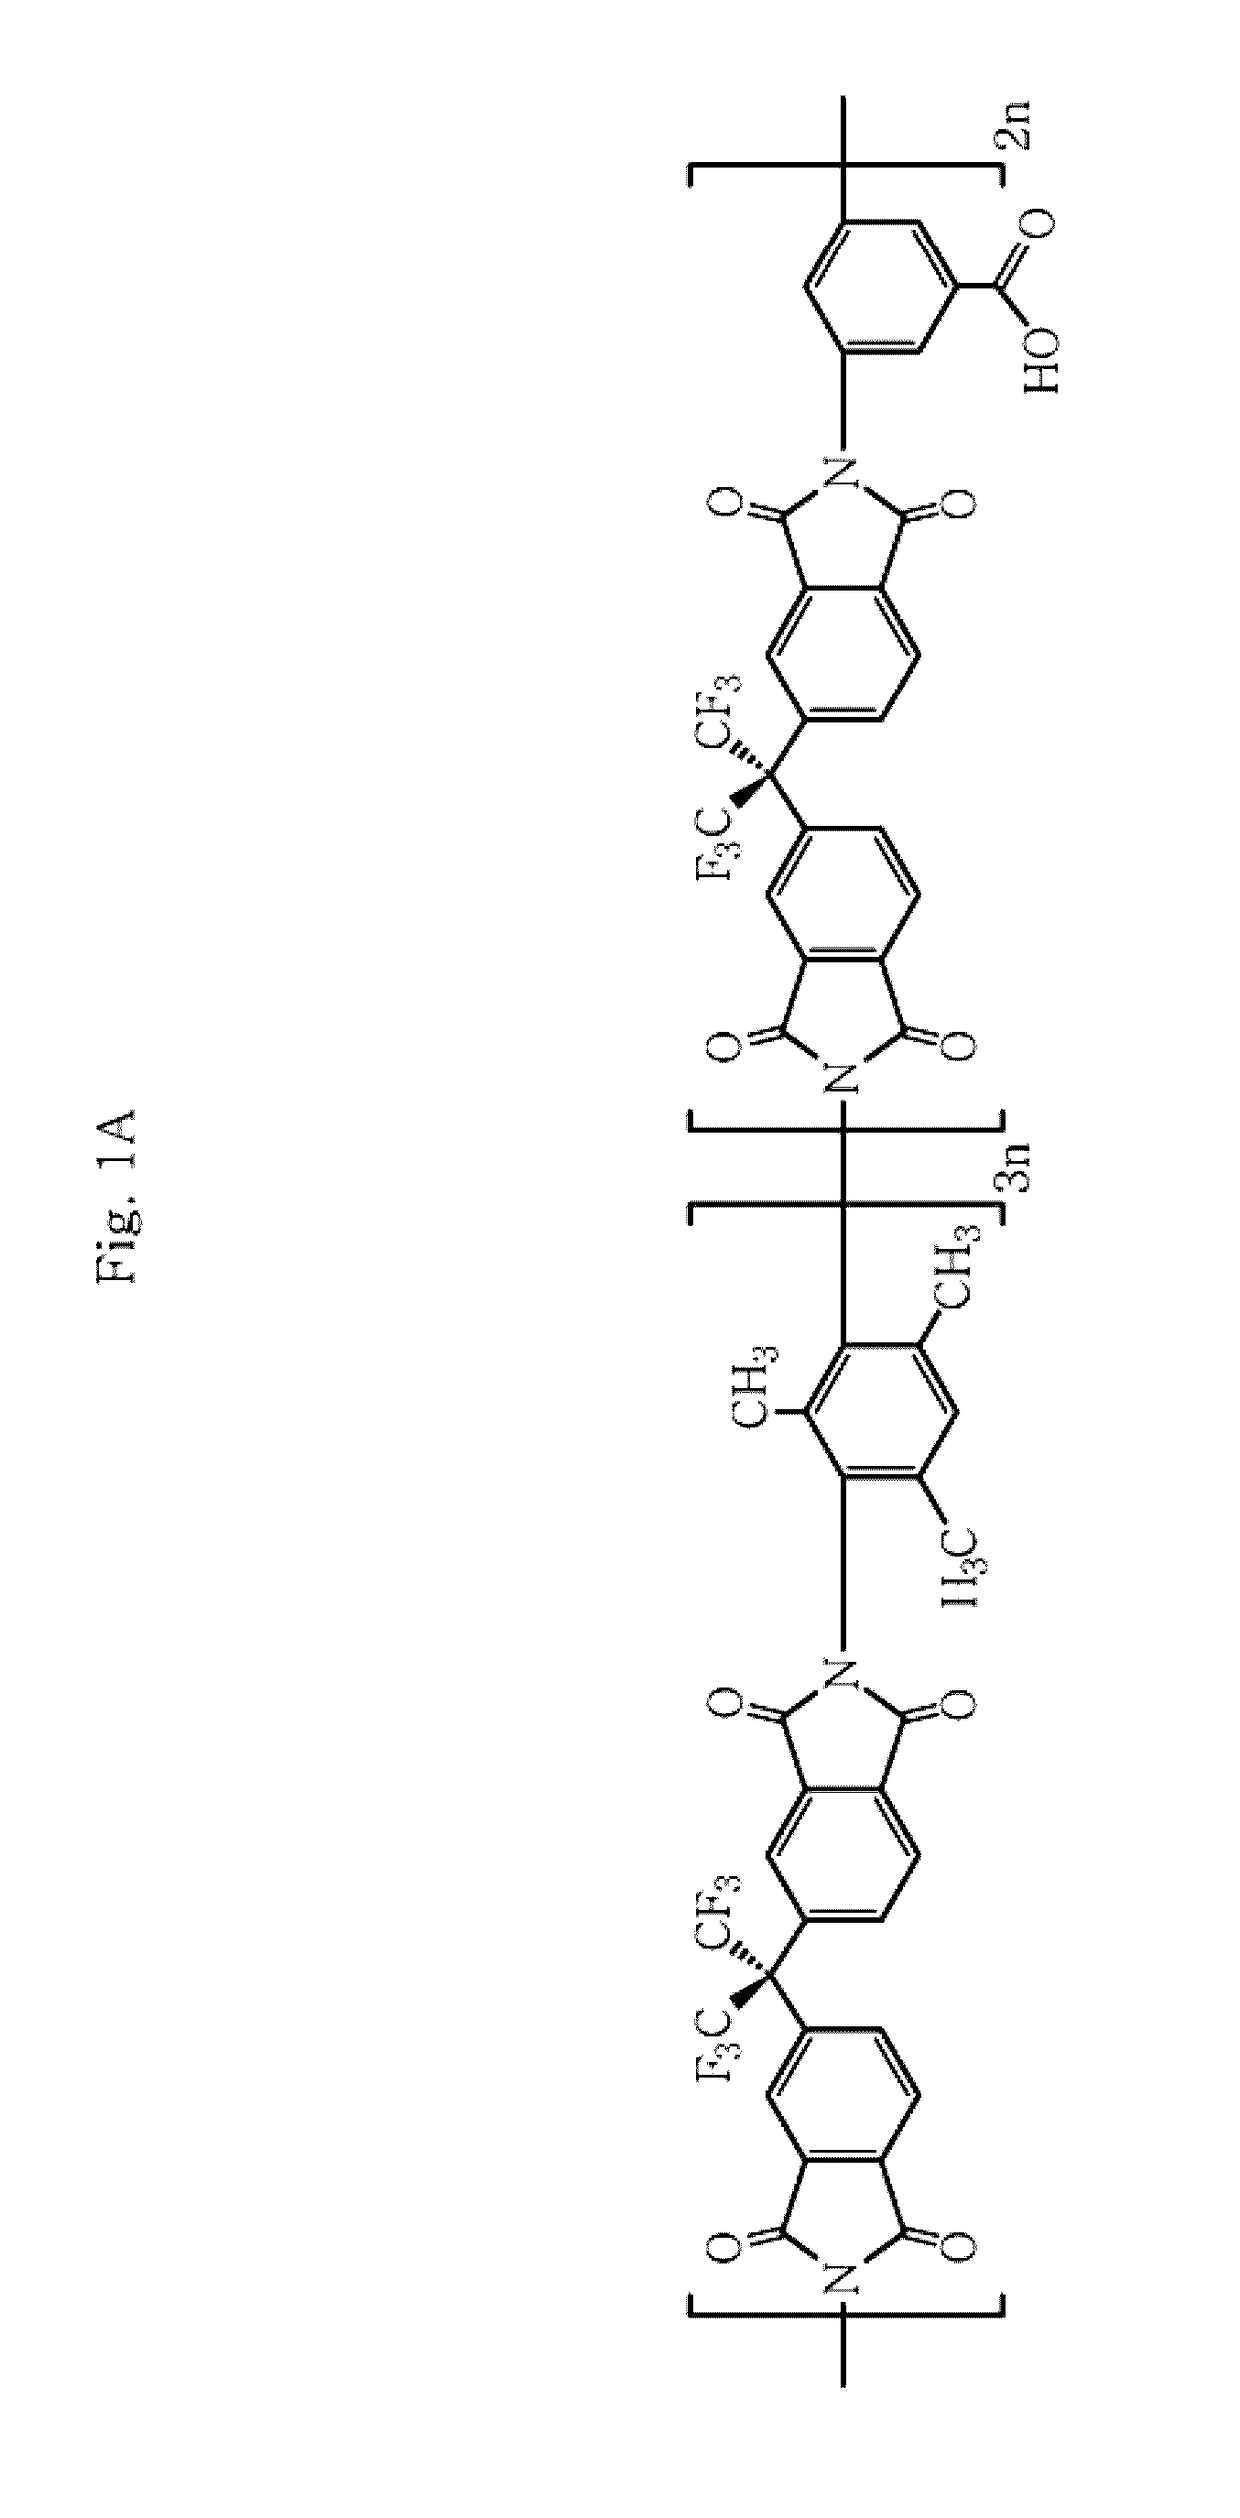 Carbon molecular sieve membranes based on fluorine-containing polymer/polysilsesquioxane blending precursors and method for fabricating the same